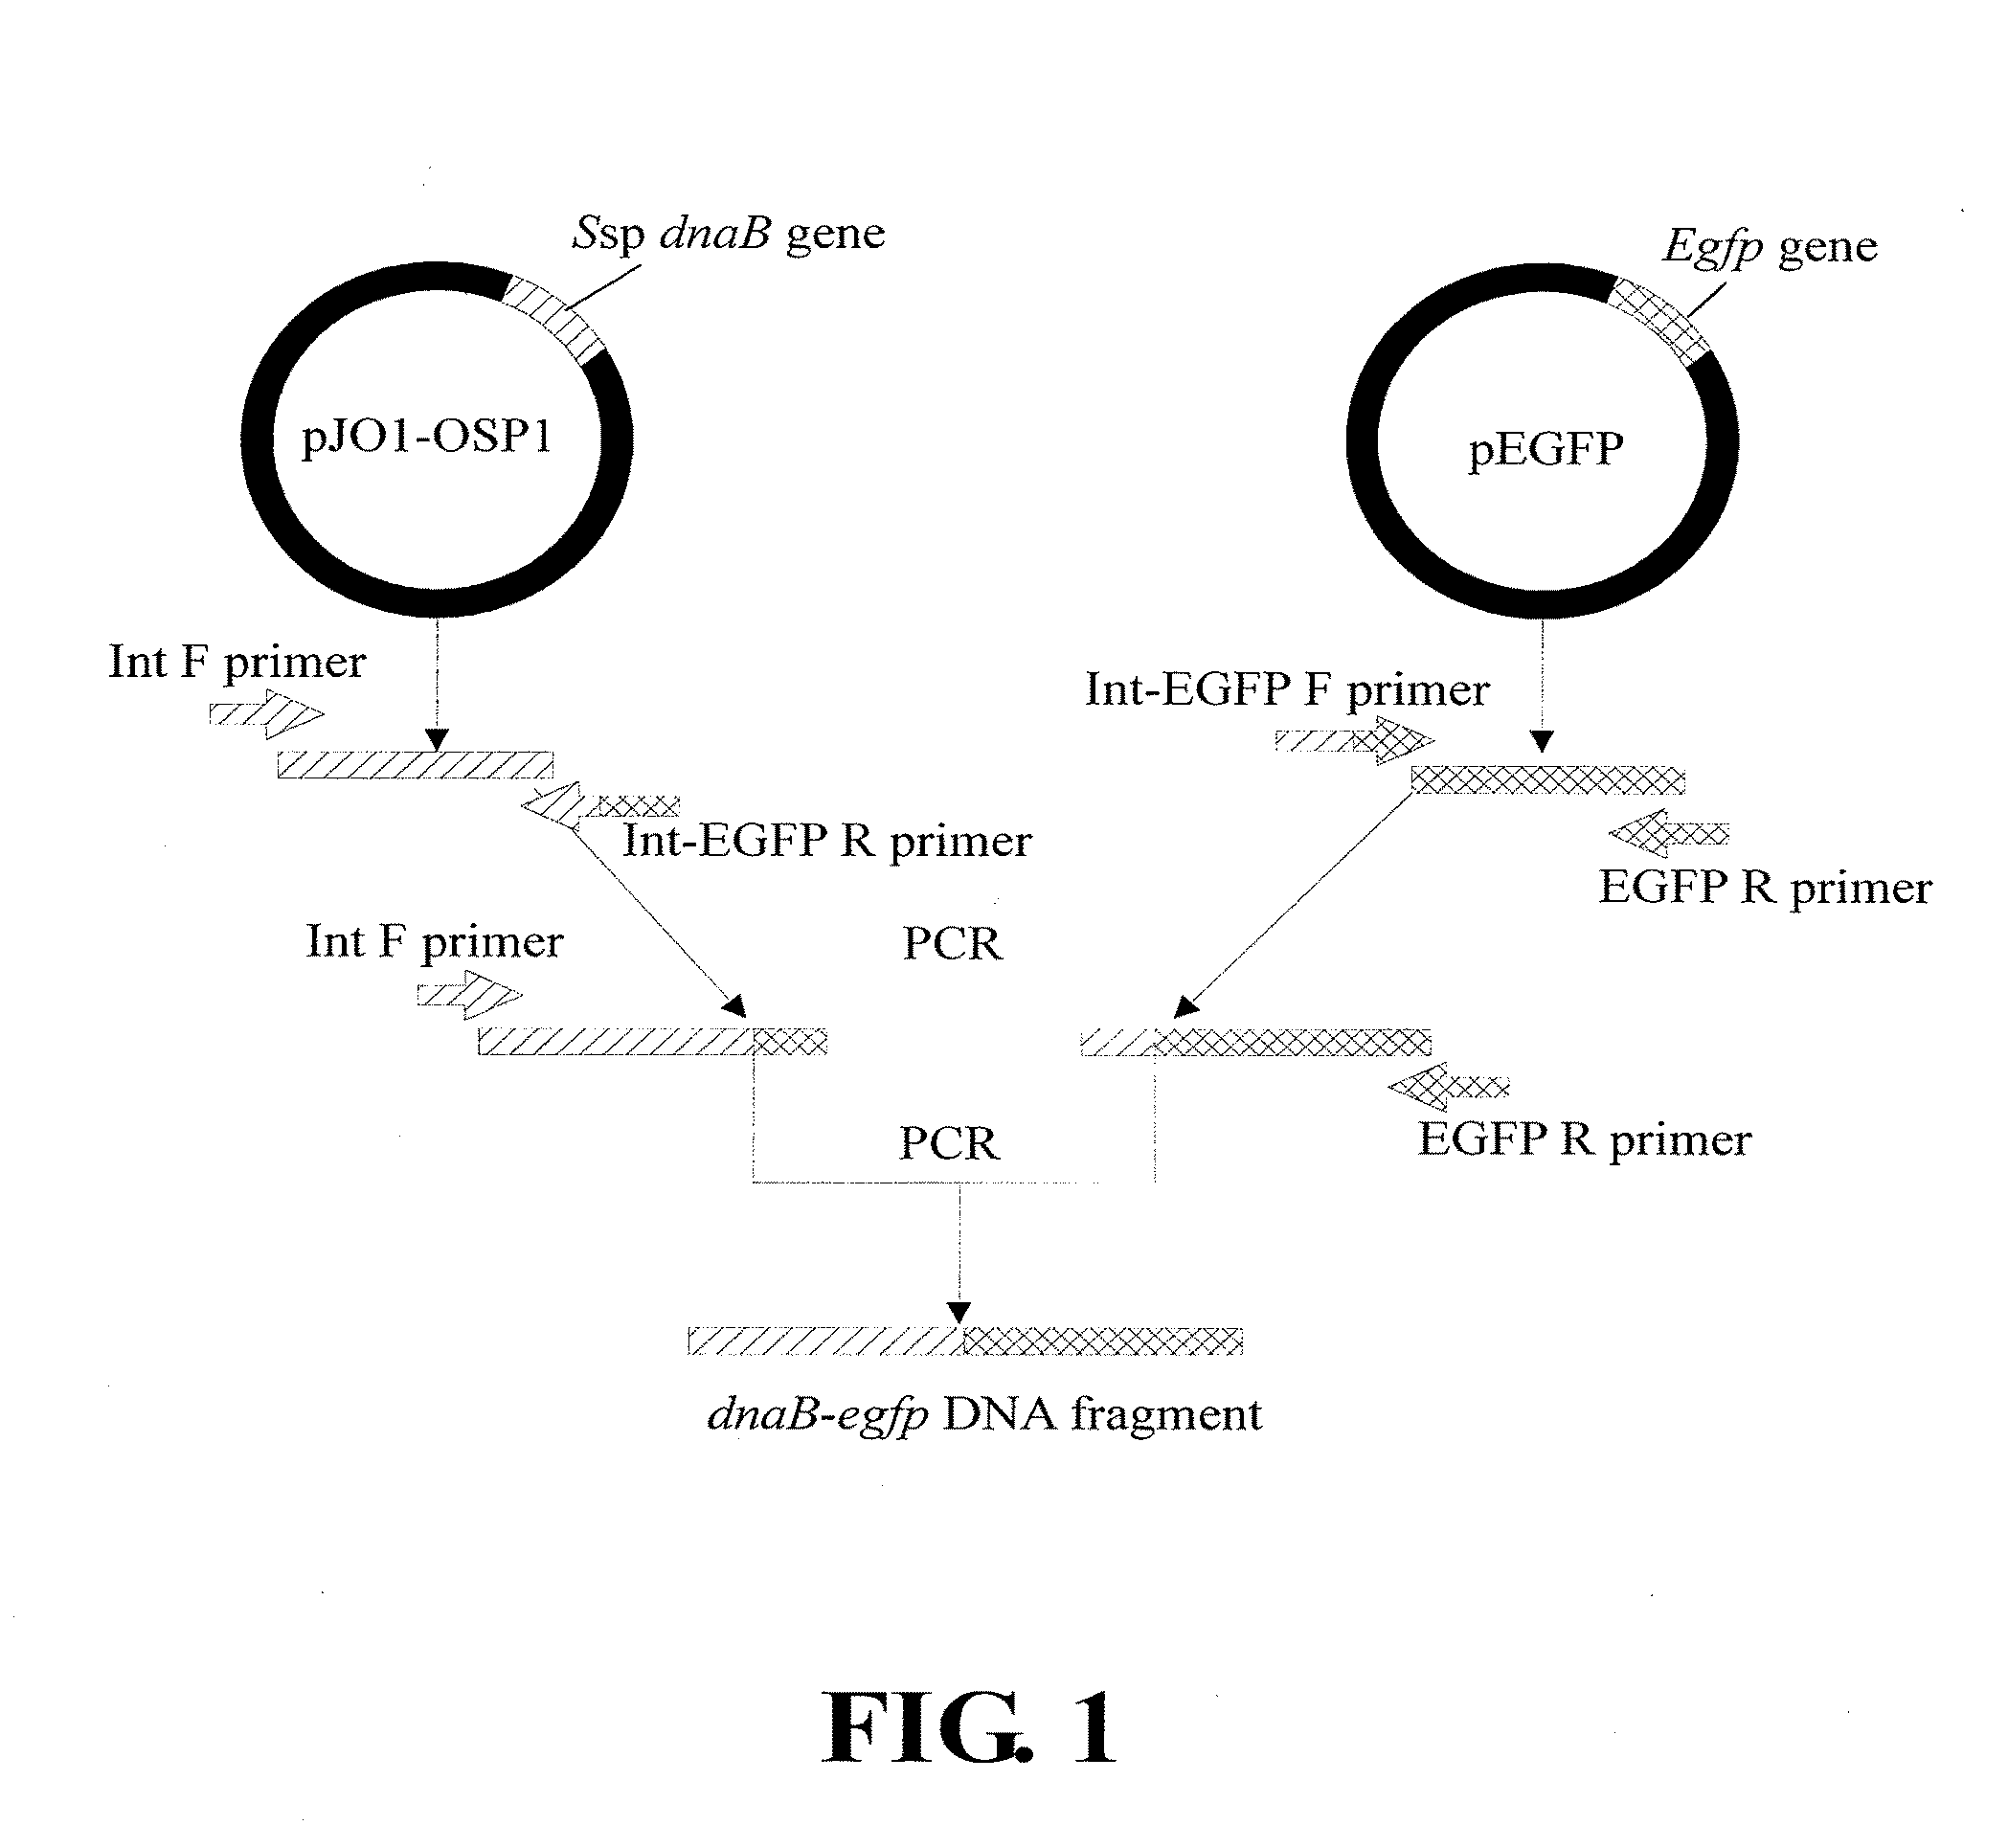 Expression Cassette, Recombinant Host Cell and Process for Producing a Target Protein